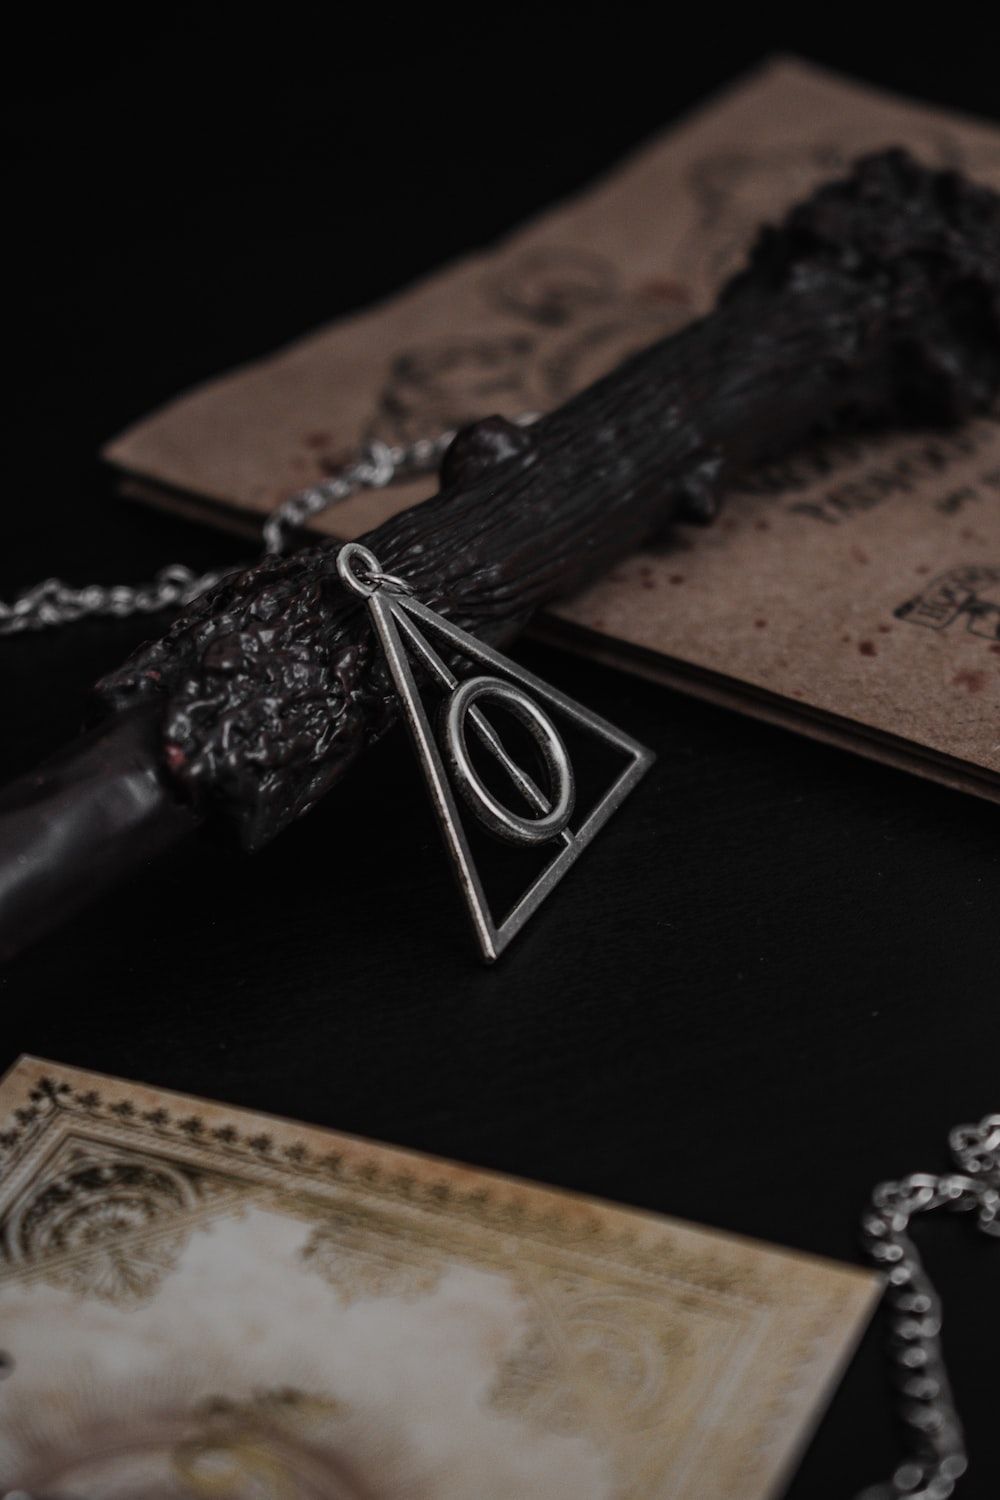 A Deathly Hallows necklace on a table with a wand and a book. - Harry Potter